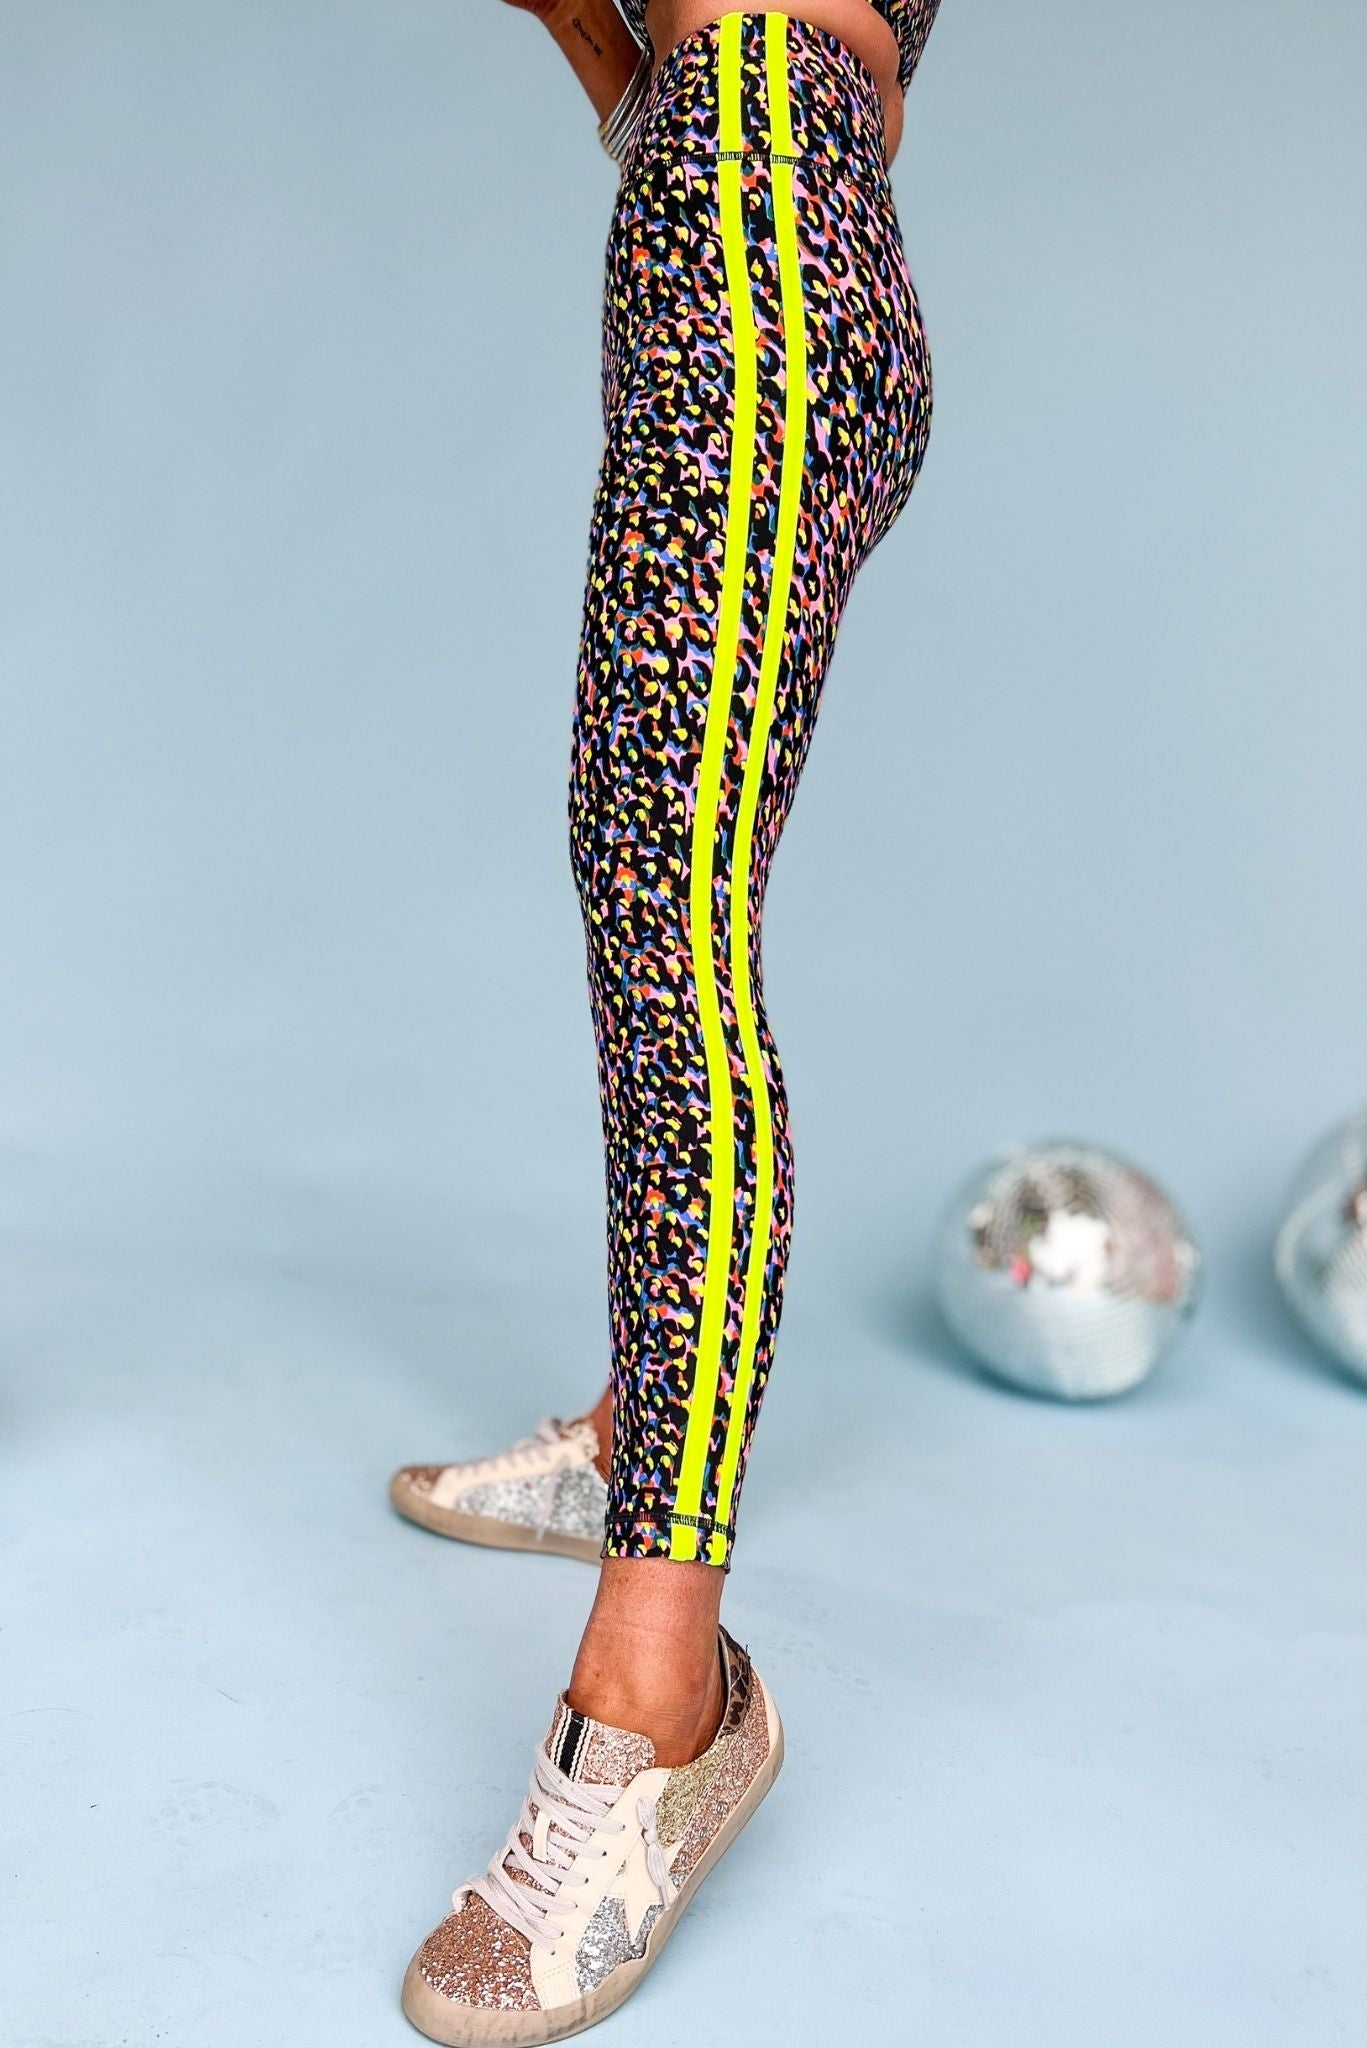 Neon Animal Print Leggings With Neon Stripes, fall fashion, must have, layered look, elevated look, mom style, shop style your senses by mallory fitzsimmons